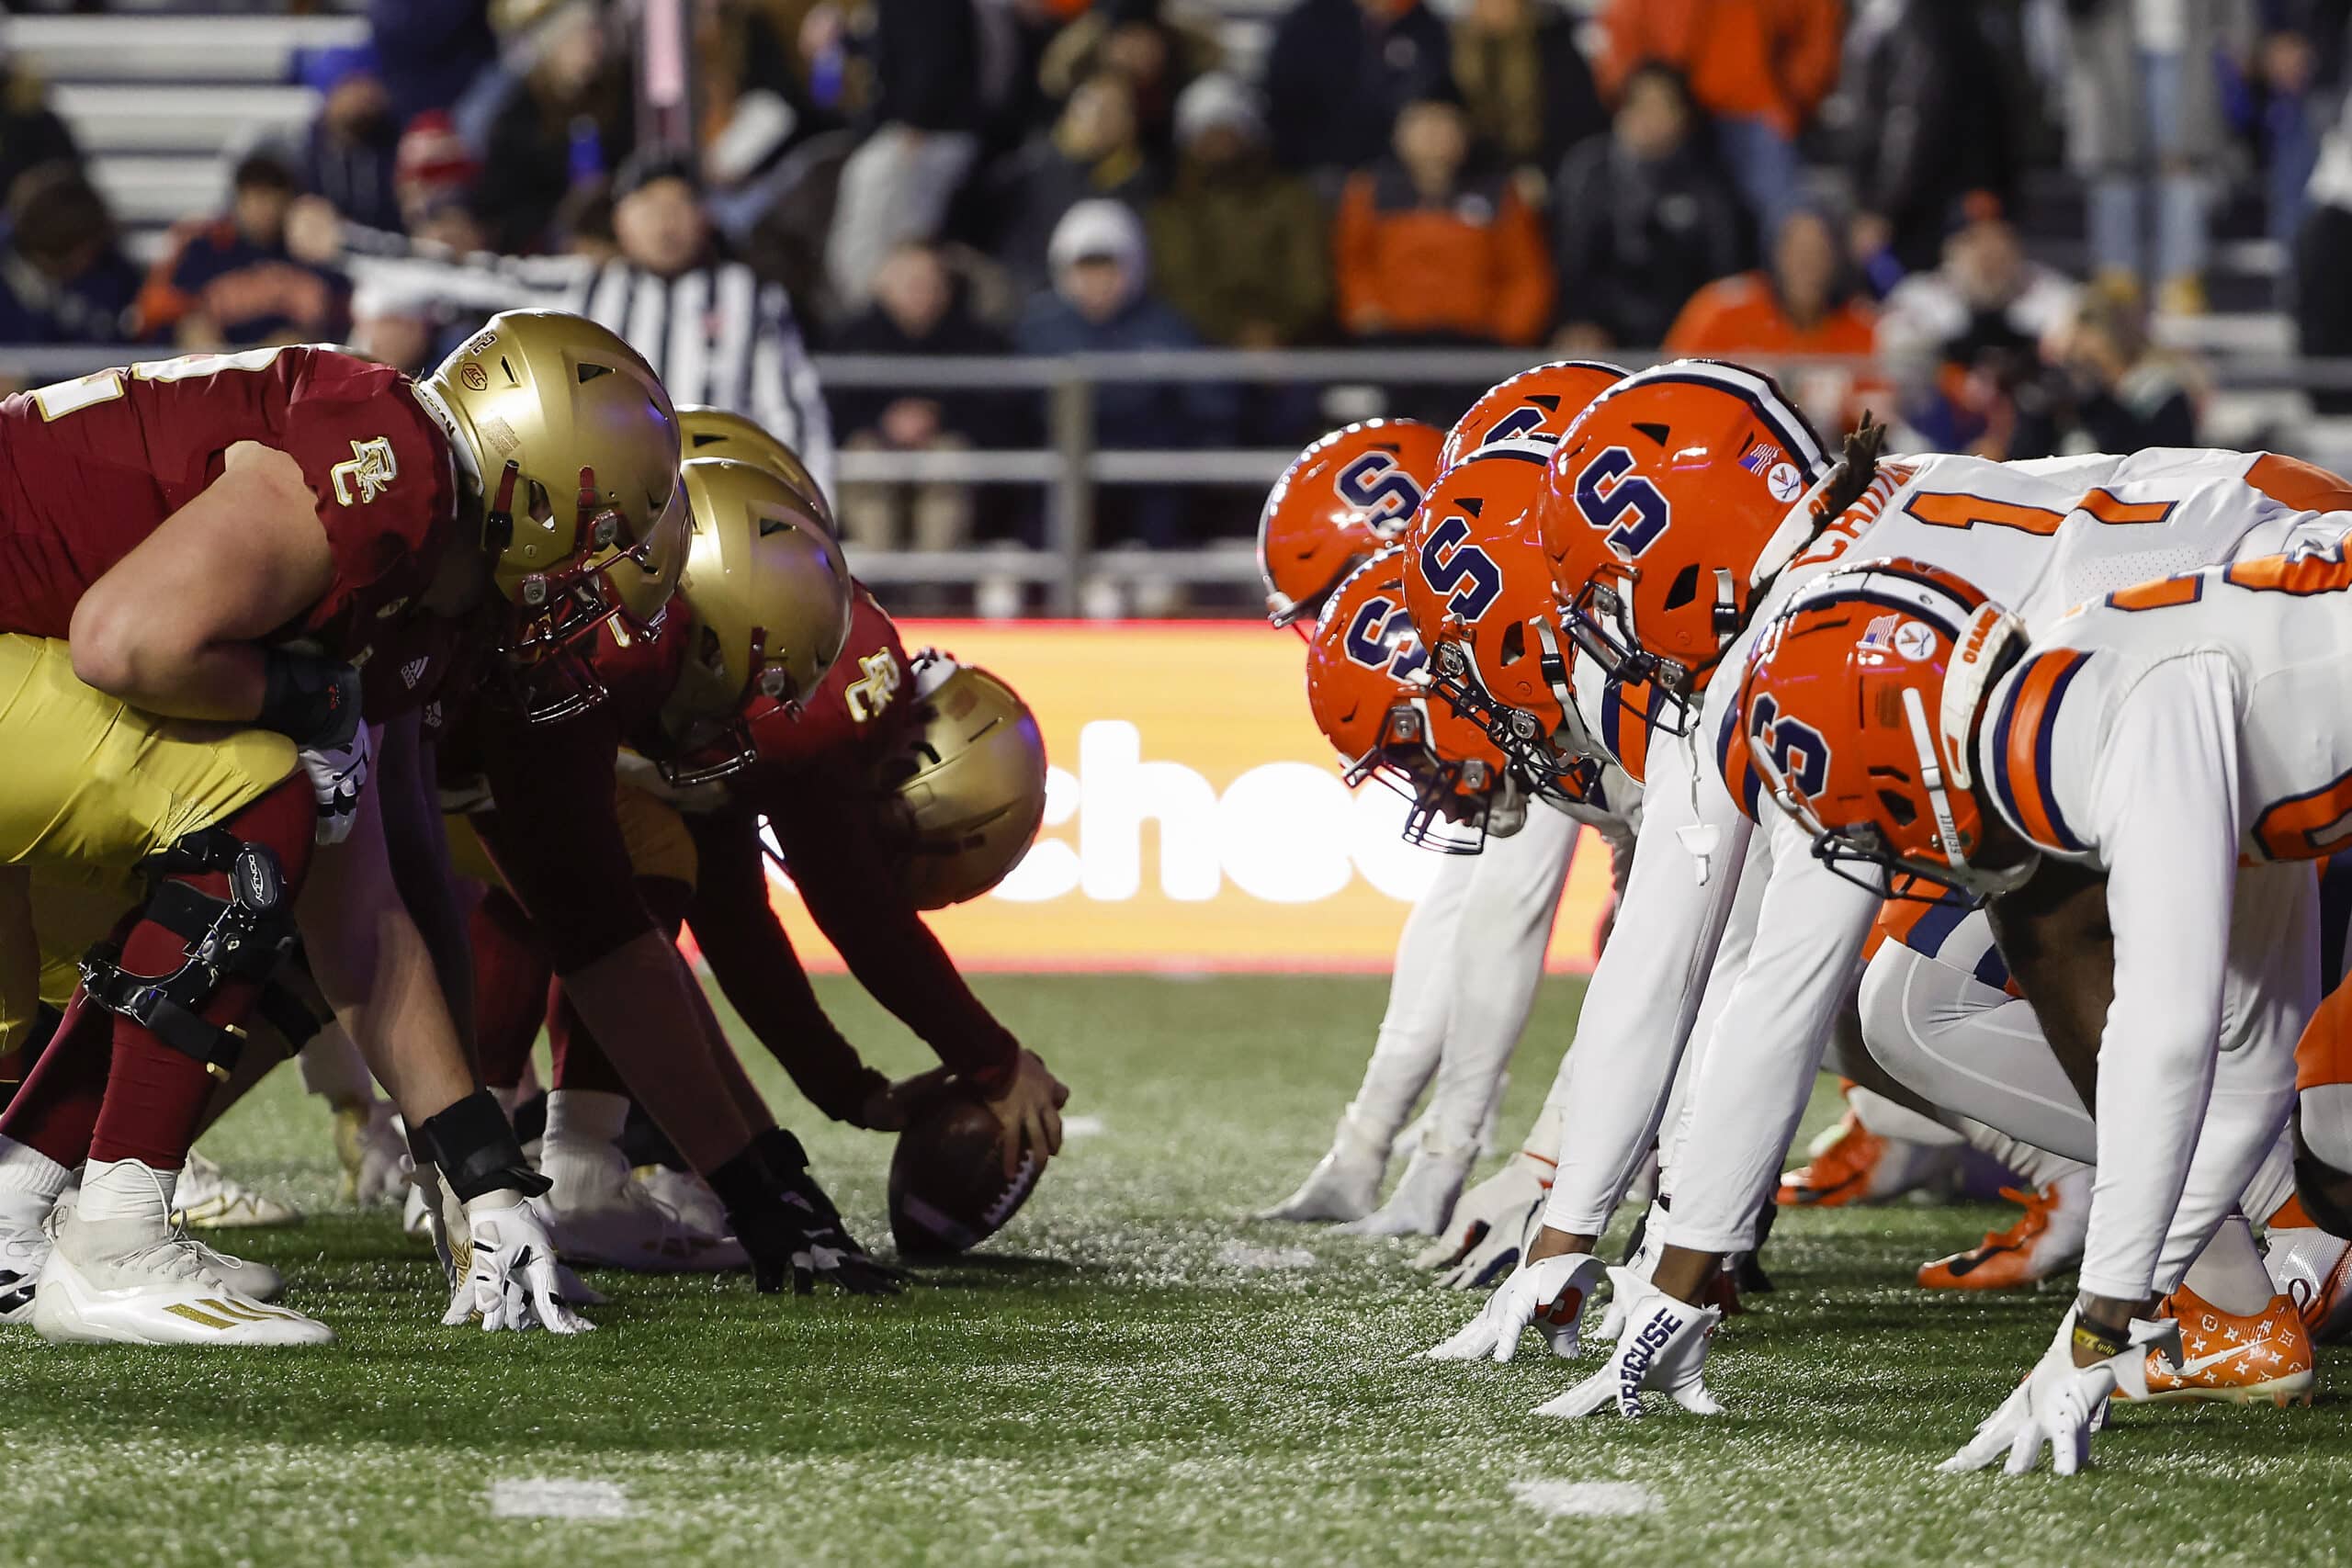 Nov 26, 2022; Chestnut Hill, Massachusetts, USA; ACC opponents the Syracuse Orange and the Boston College Eagles line up for the snap at the line of scrimmage during the first quarter at Alumni Stadium.